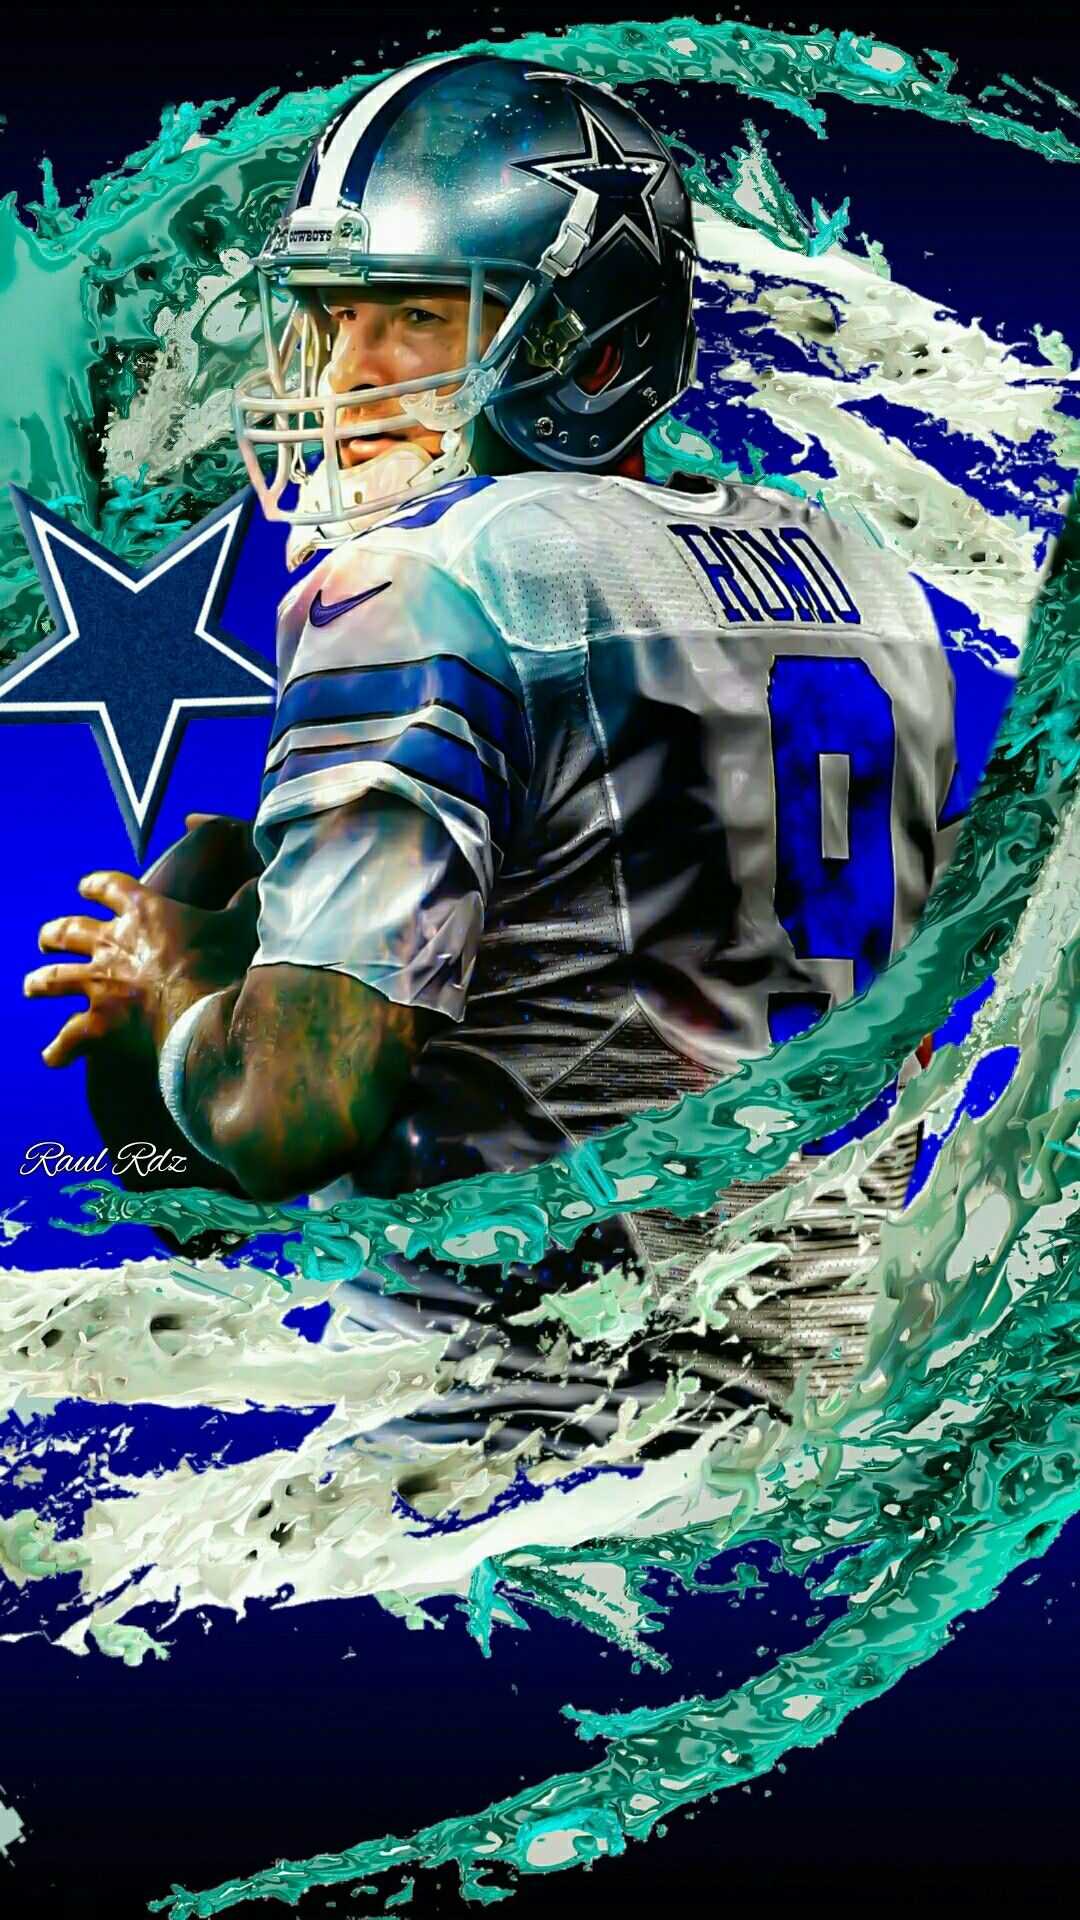 cowboys cool wallpapers